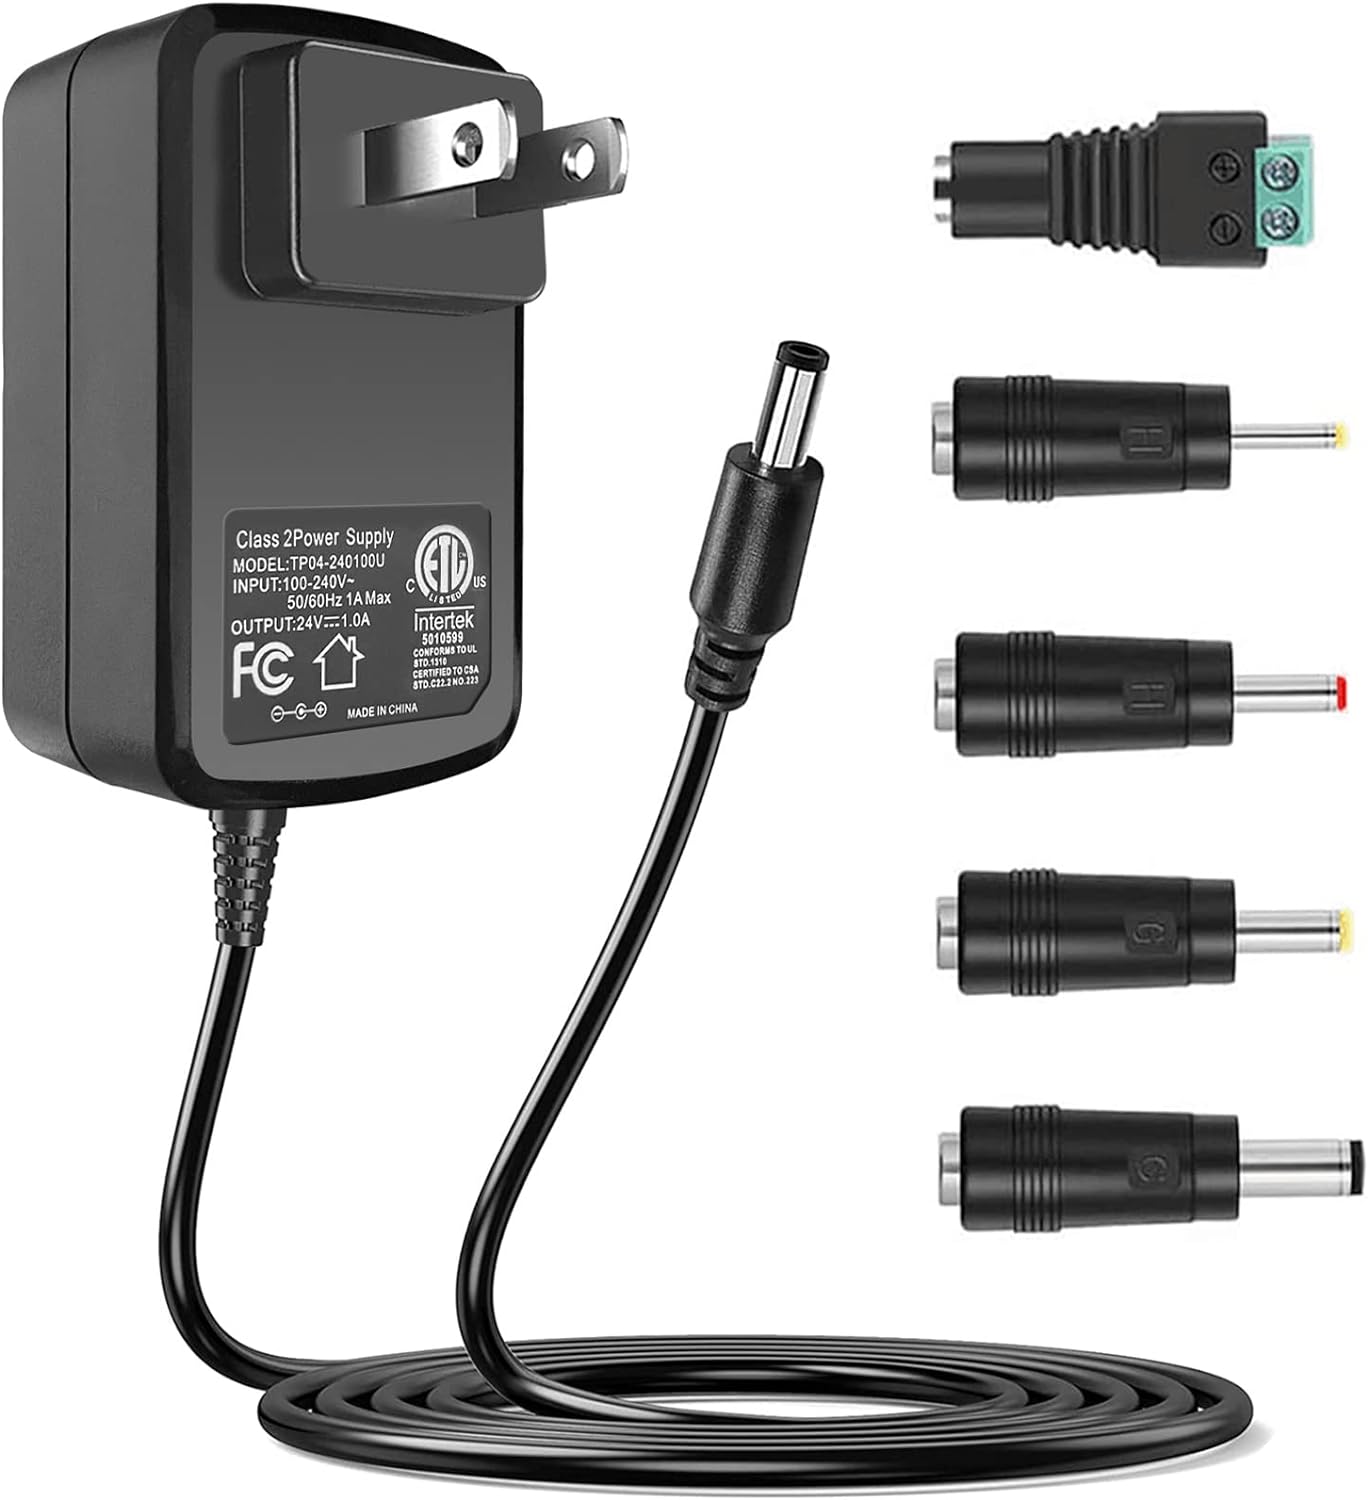 100V-240V to 24V 1A AC/DC Switching Power Supply Adapter with 5 Selectable Adapter Plugs Connector Type 2-Pin Compatibl - Click Image to Close